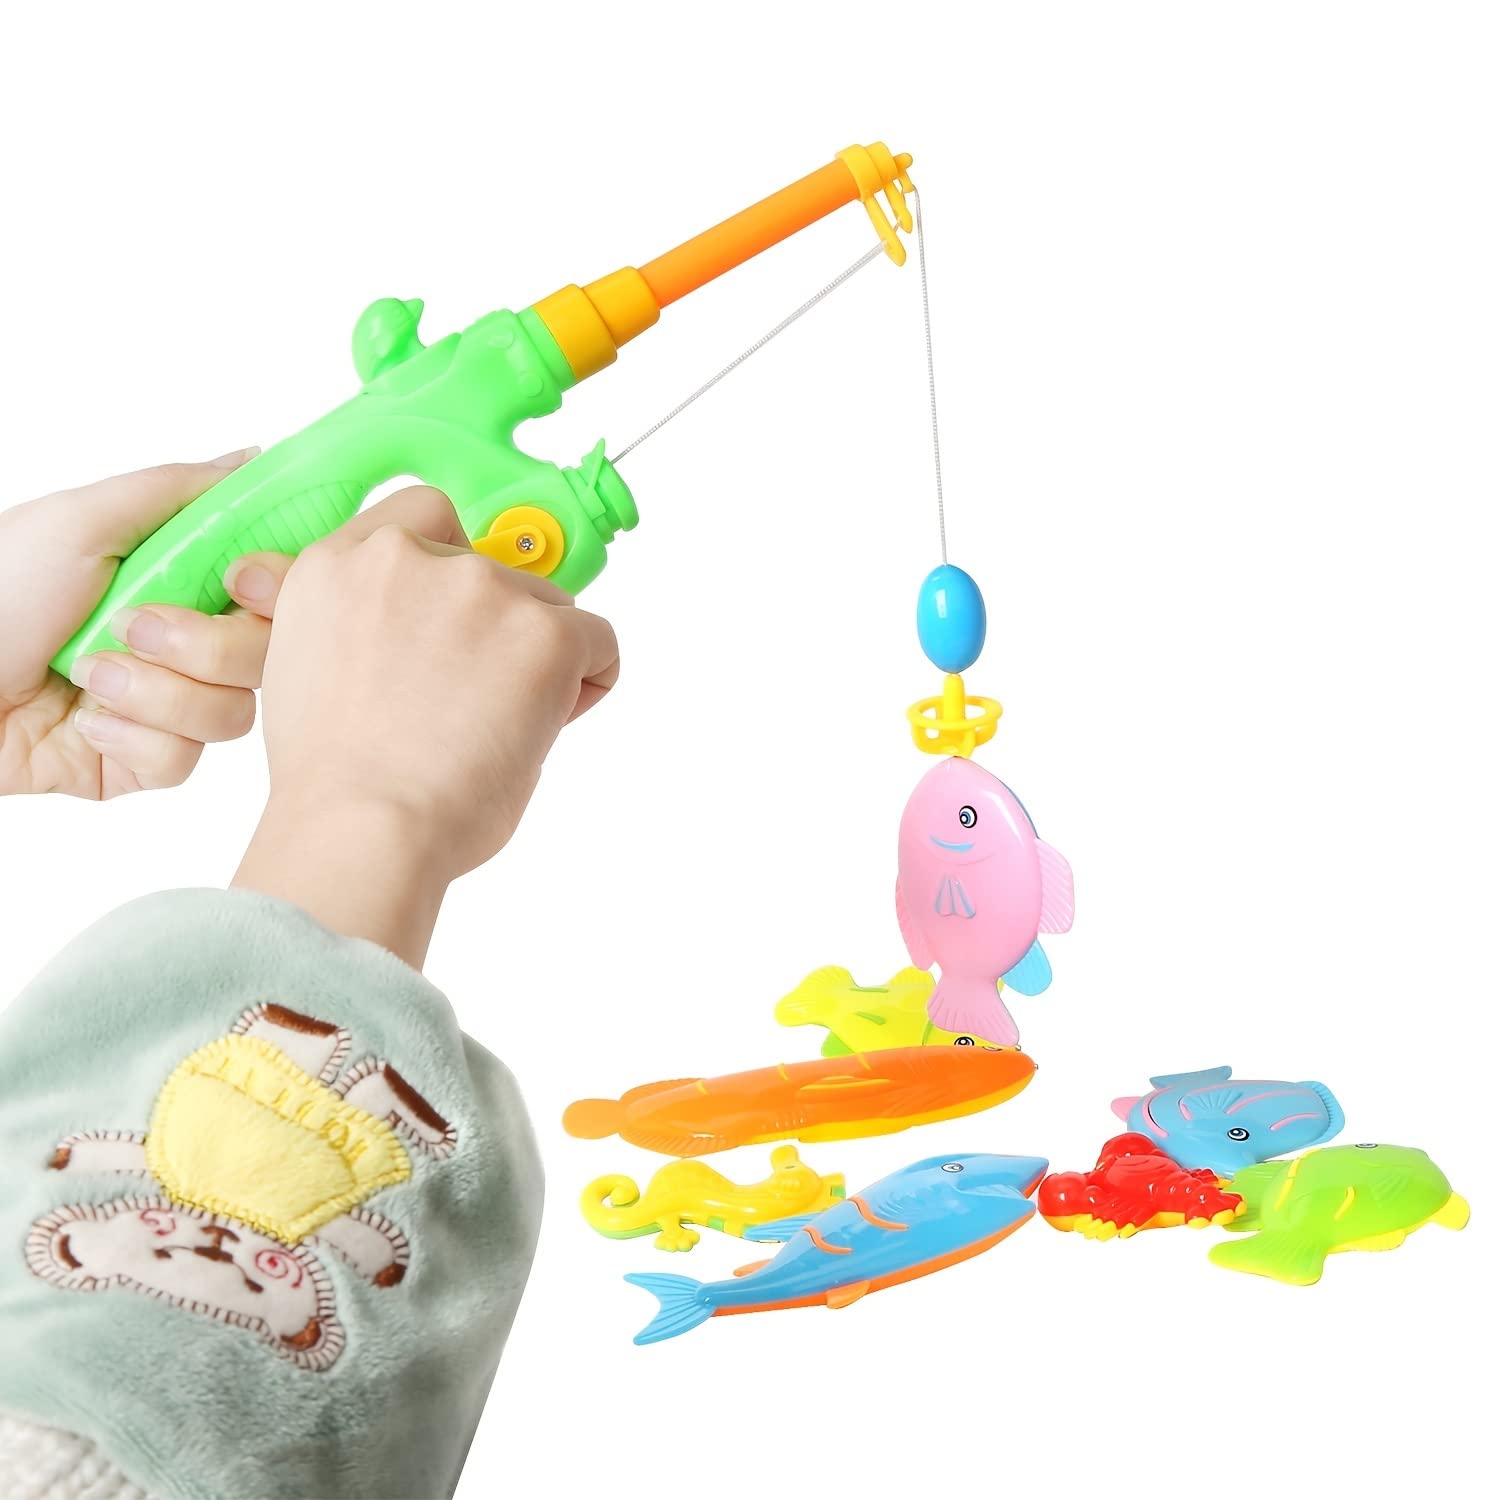 Bath Toys for Kids - Magnetic Fishing Bathtub Toys, Kiddie Water Bath Toys with Pole Rod Plastic Floating Fish Toddler Colorful Ocean Sea Animals, Bath Toy, Pool Toys, Bath Toys for Toddlers 1-3 Gifts